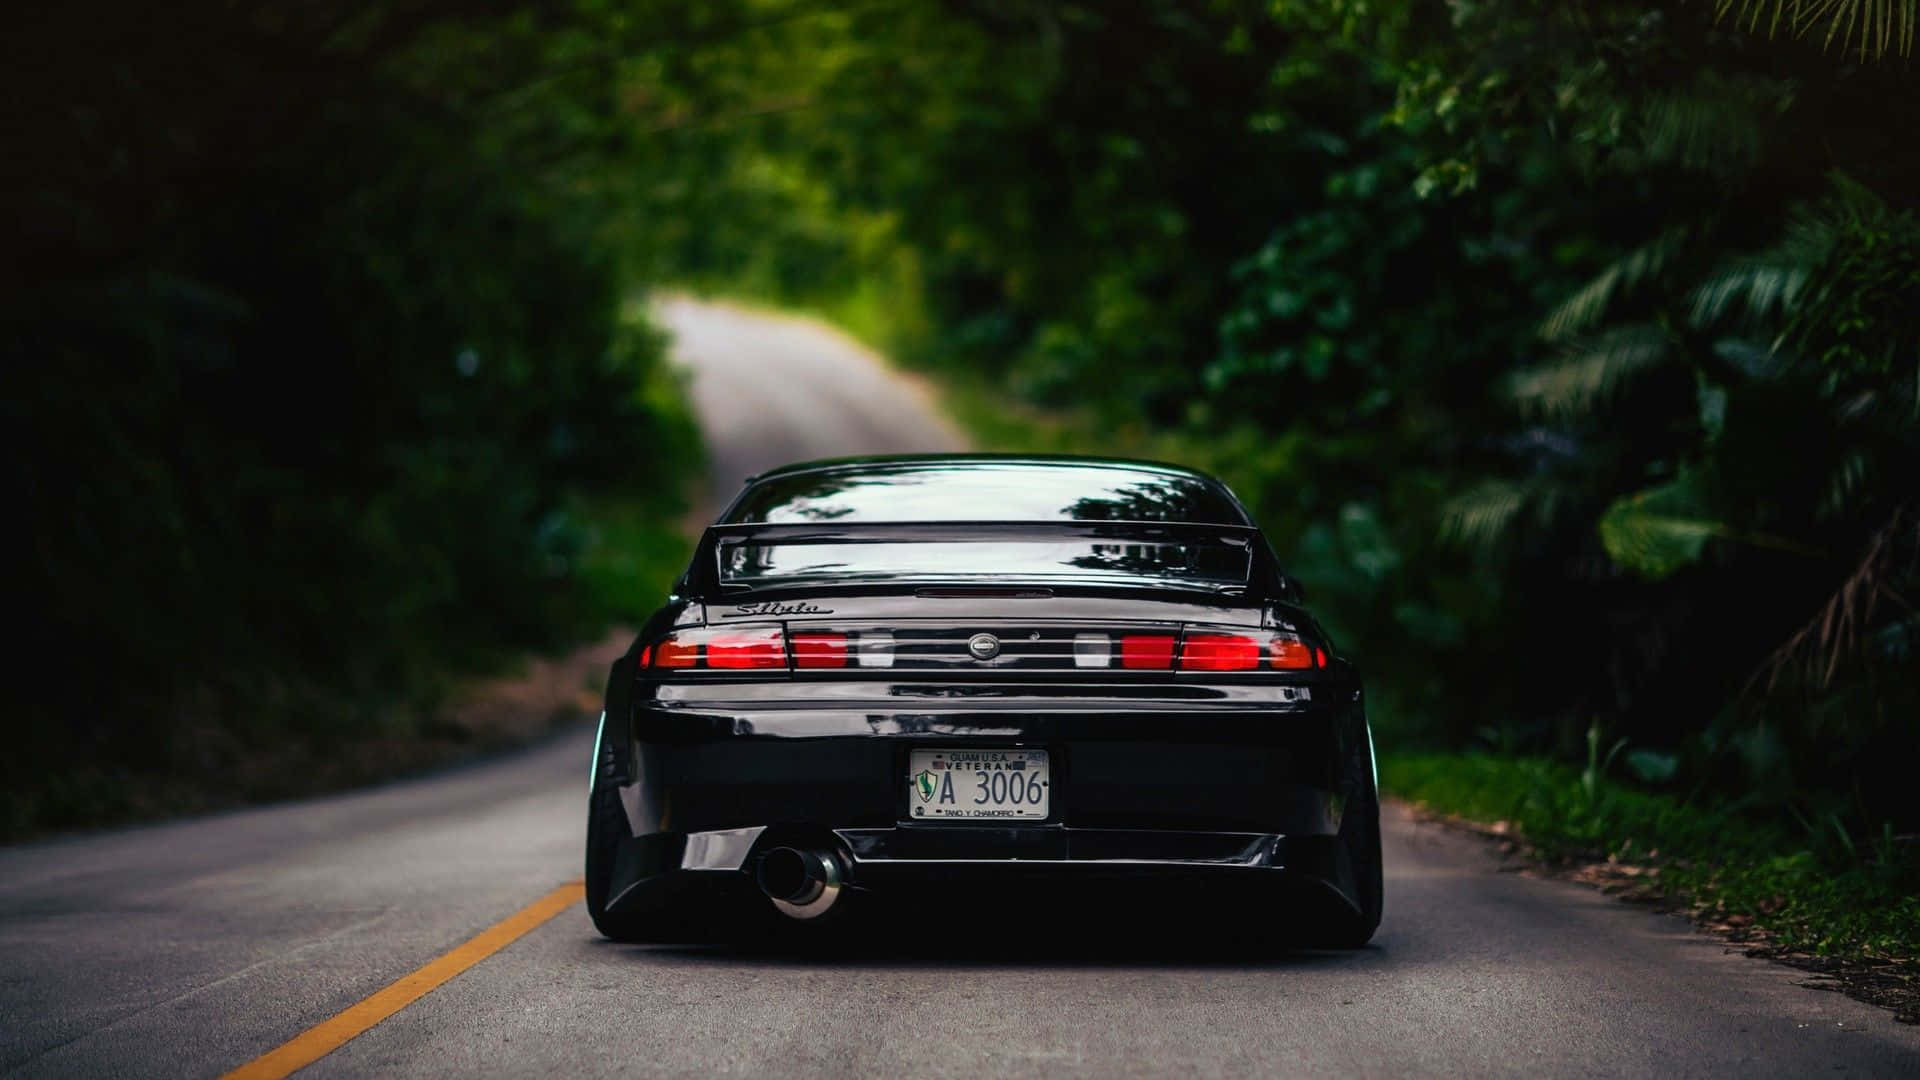 From The Streets to the Track, Stance Jdm Represents the Best in JDM Performance Wallpaper